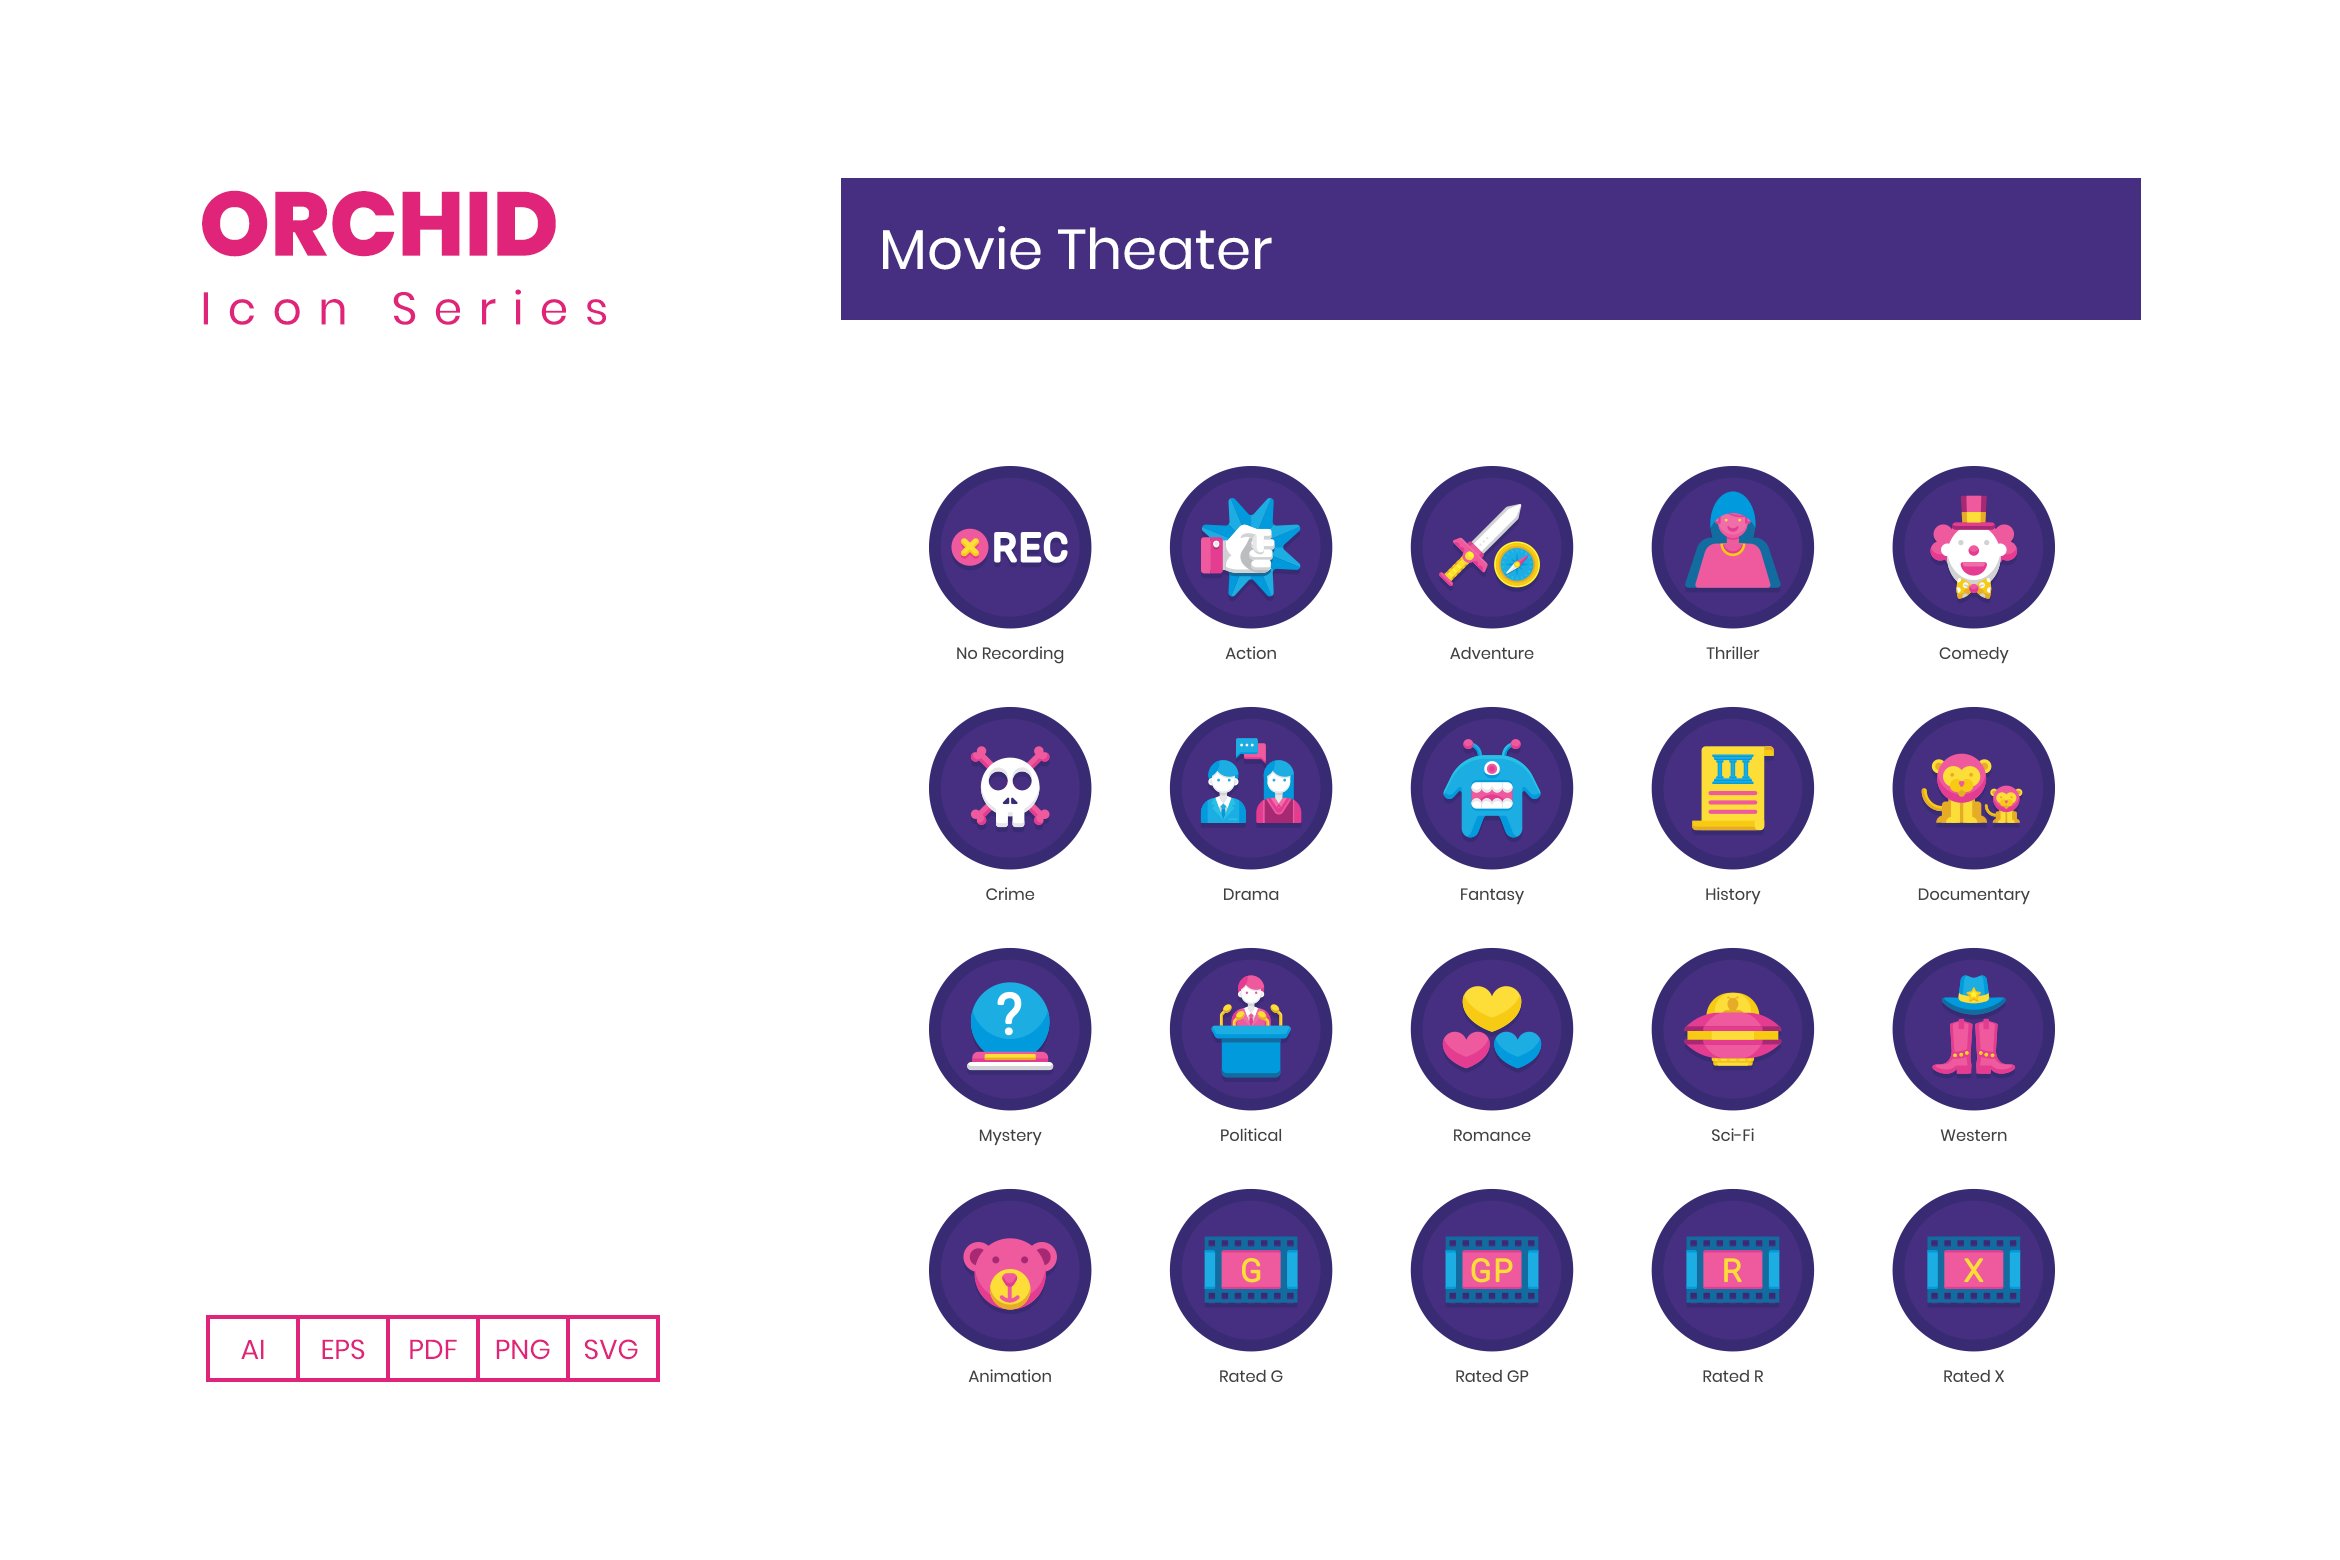 55 Movie Theater Icons - Orchid preview image.